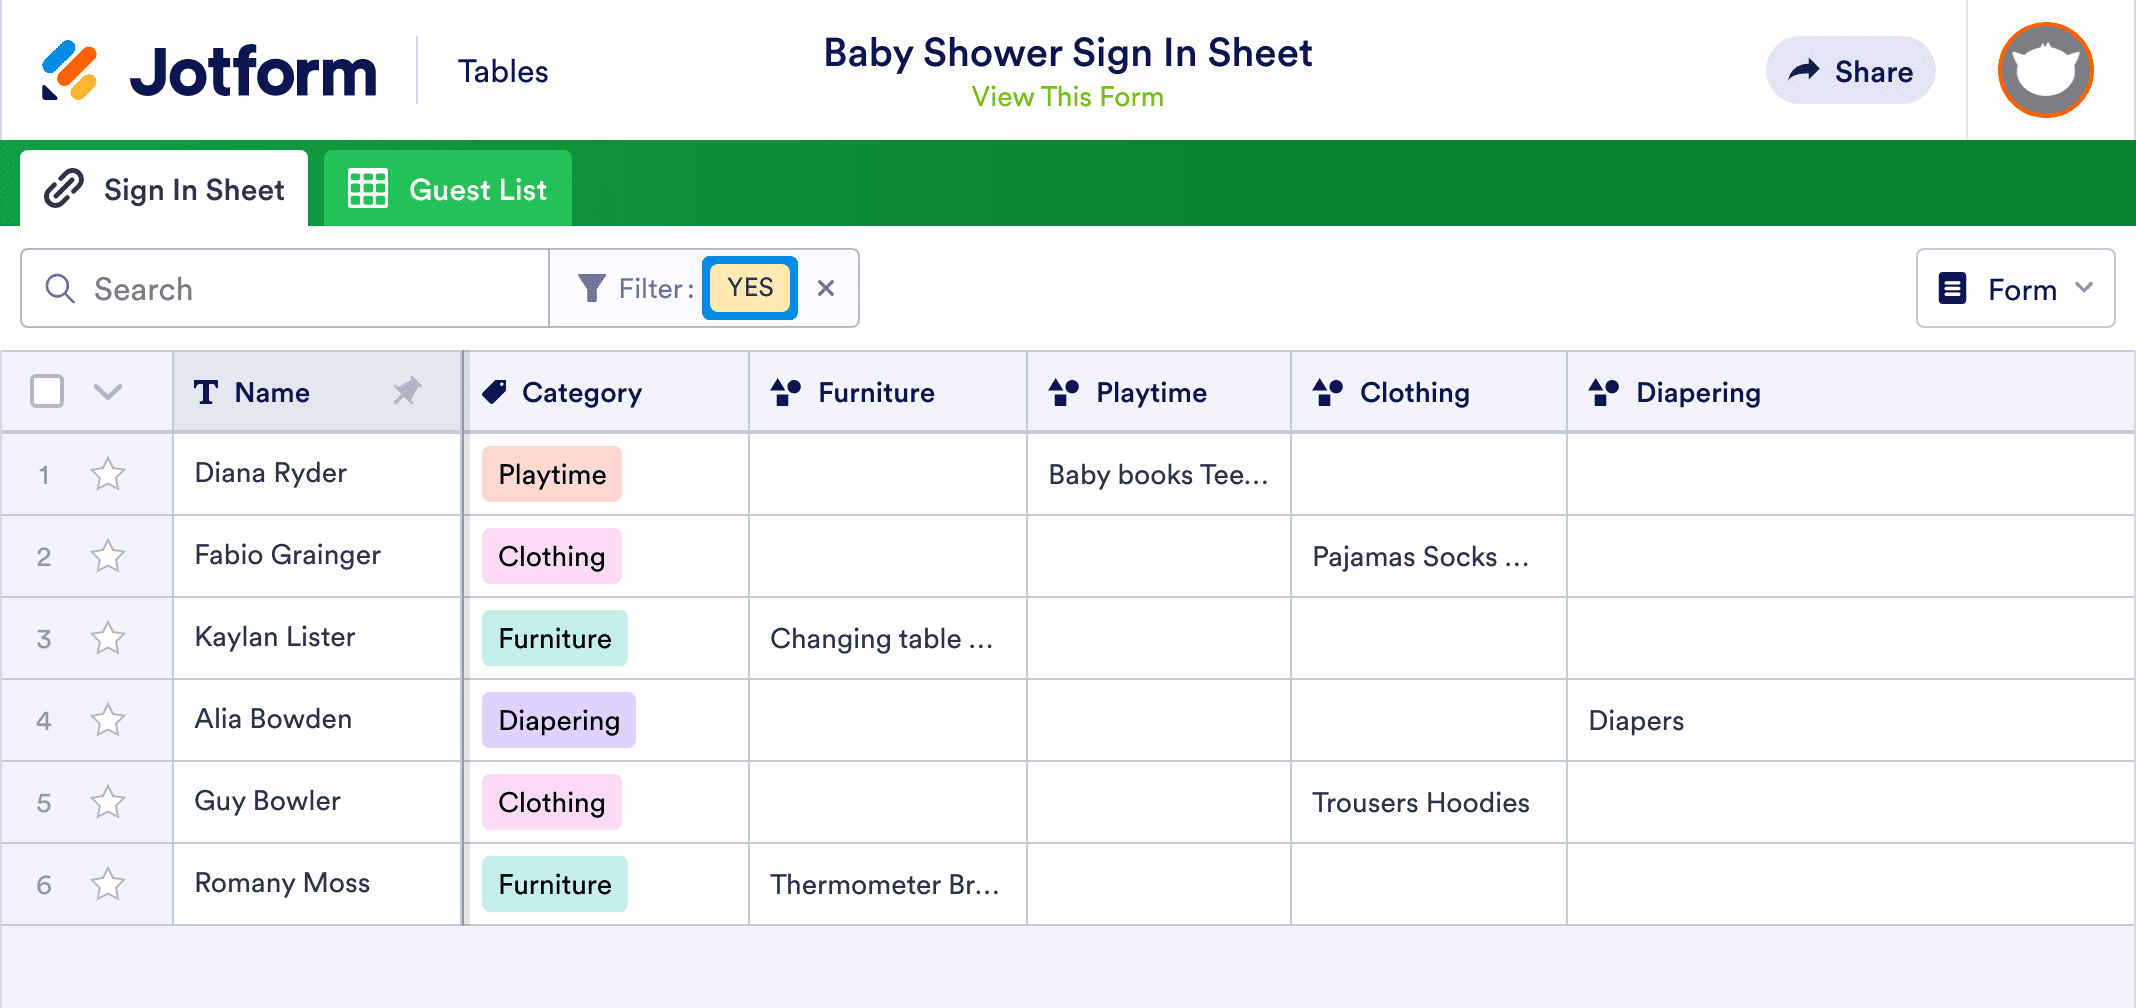 Baby Shower Sign In Sheet